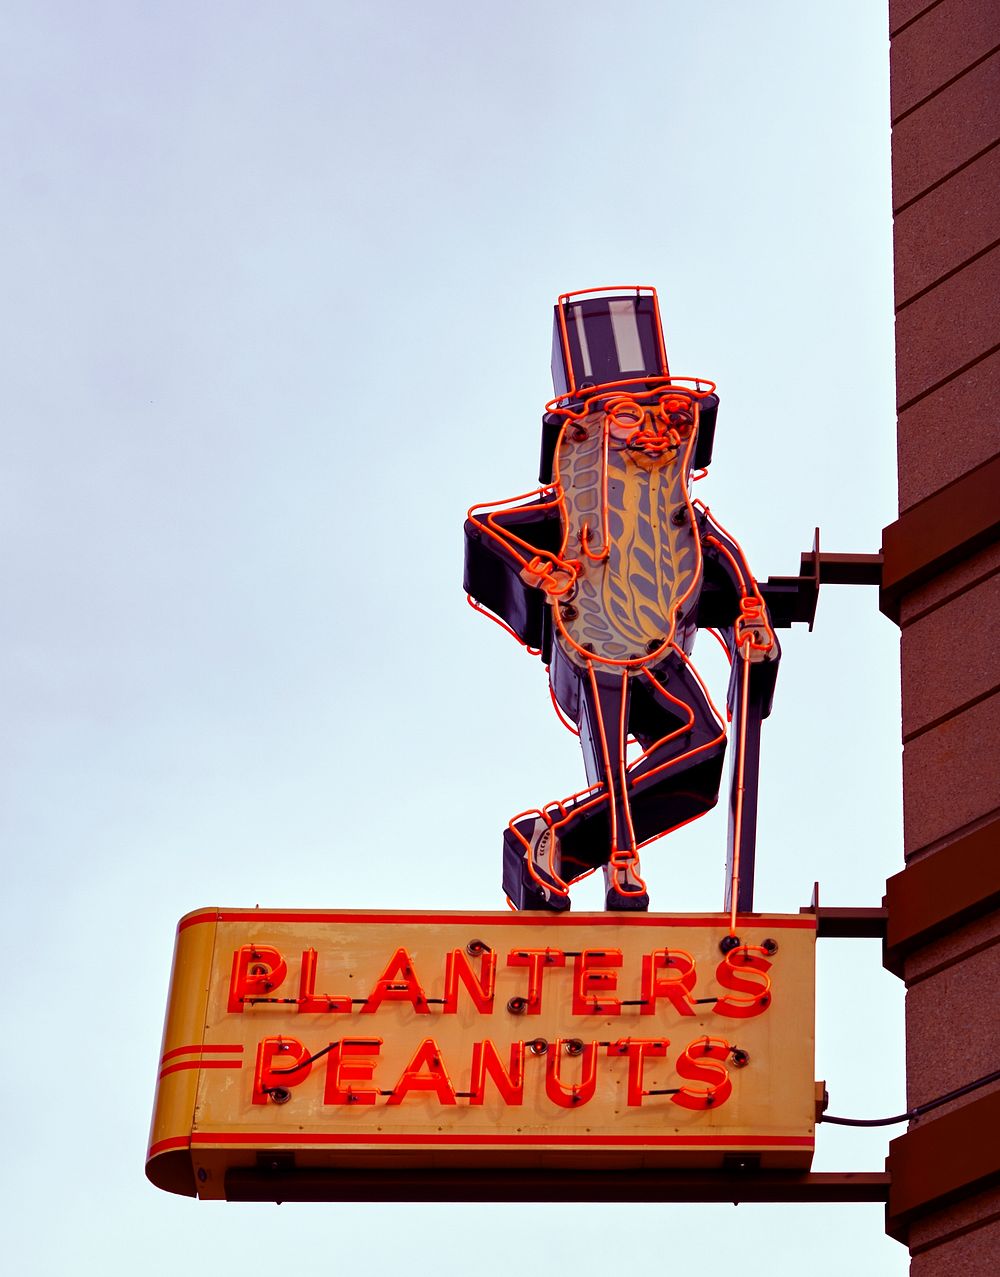 Planters peanuts neon sign in Columbus, Ohio. Original image from Carol M. Highsmith&rsquo;s America, Library of Congress…